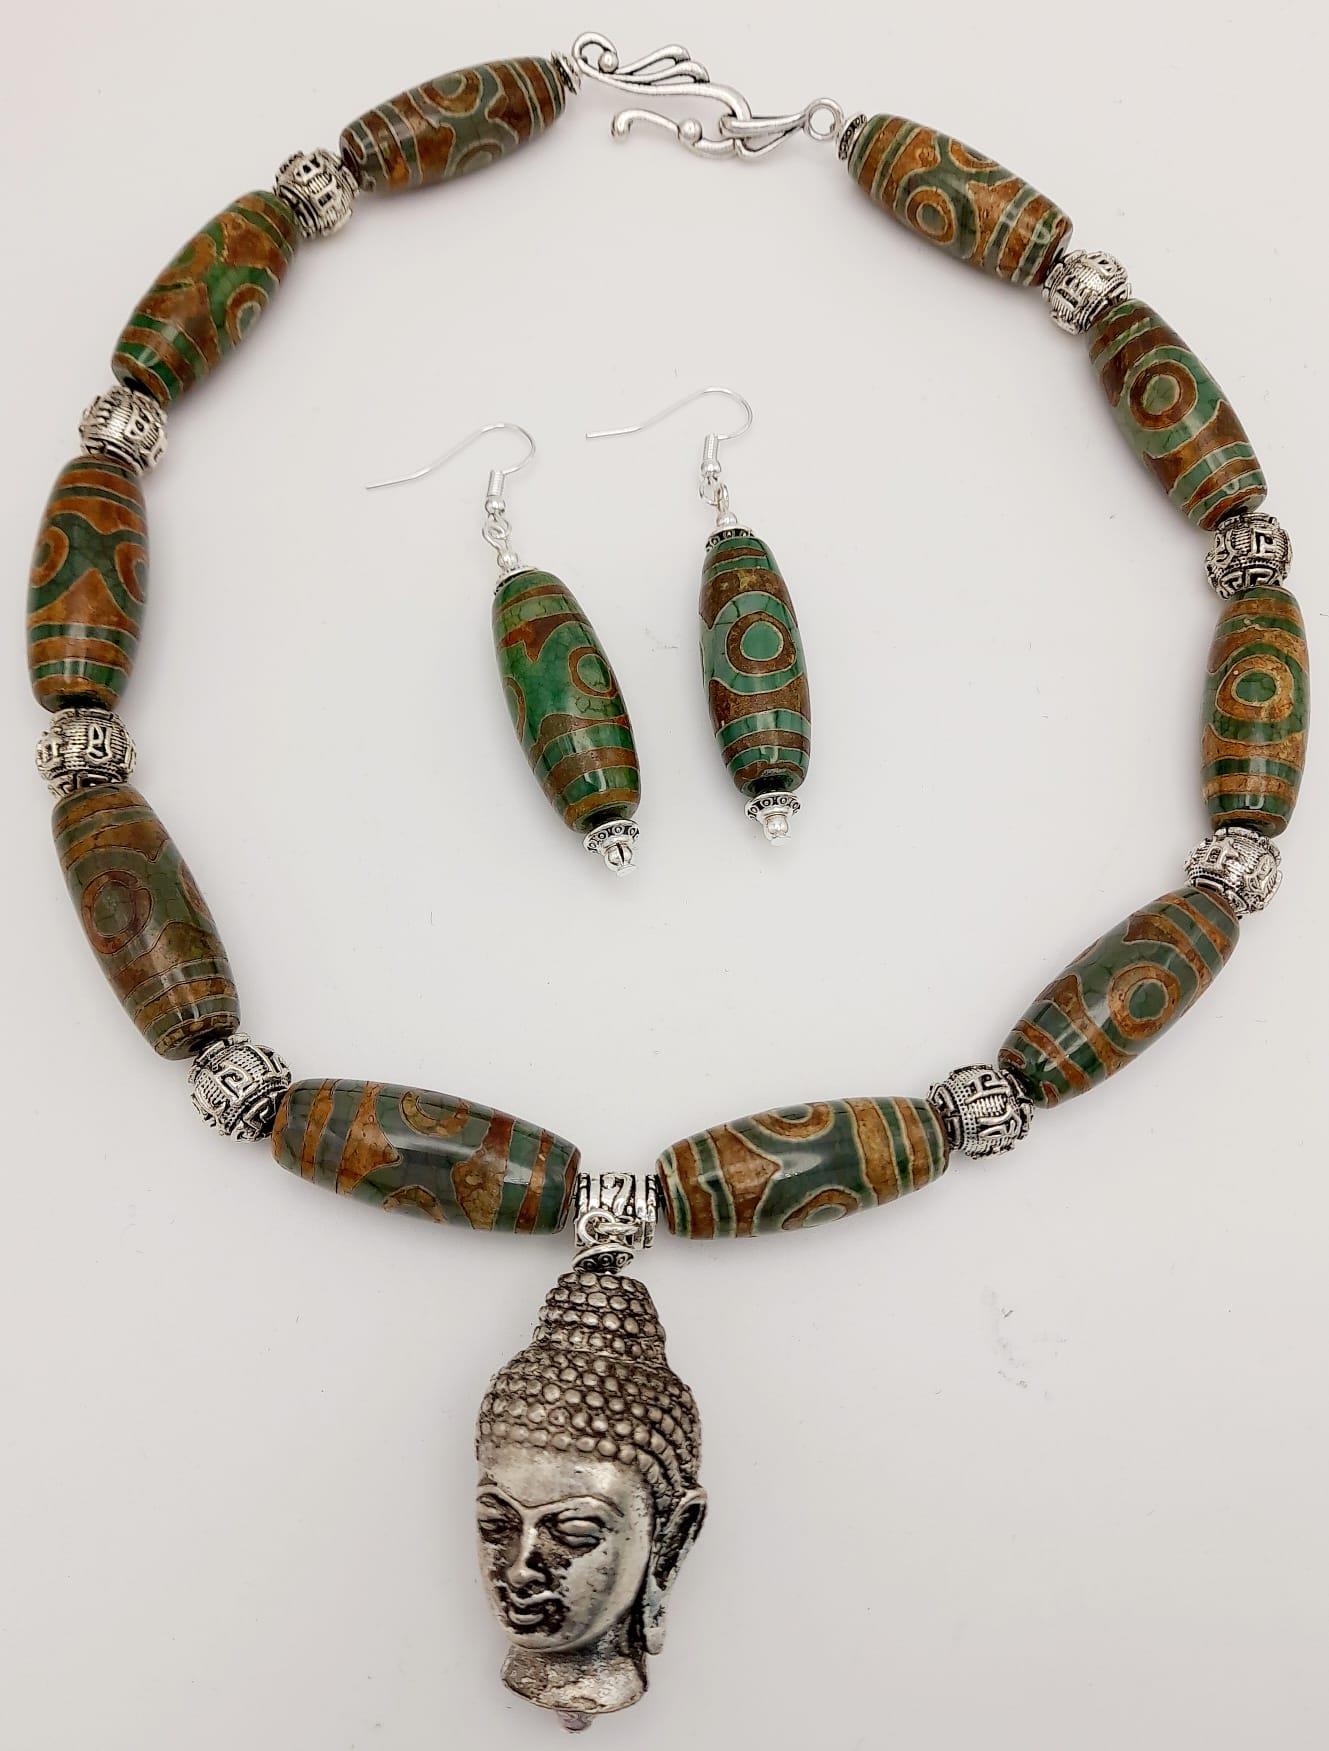 A Tibetan silver, Buddhist, necklace and earrings set with light coloured, three eyed, agate, DZI